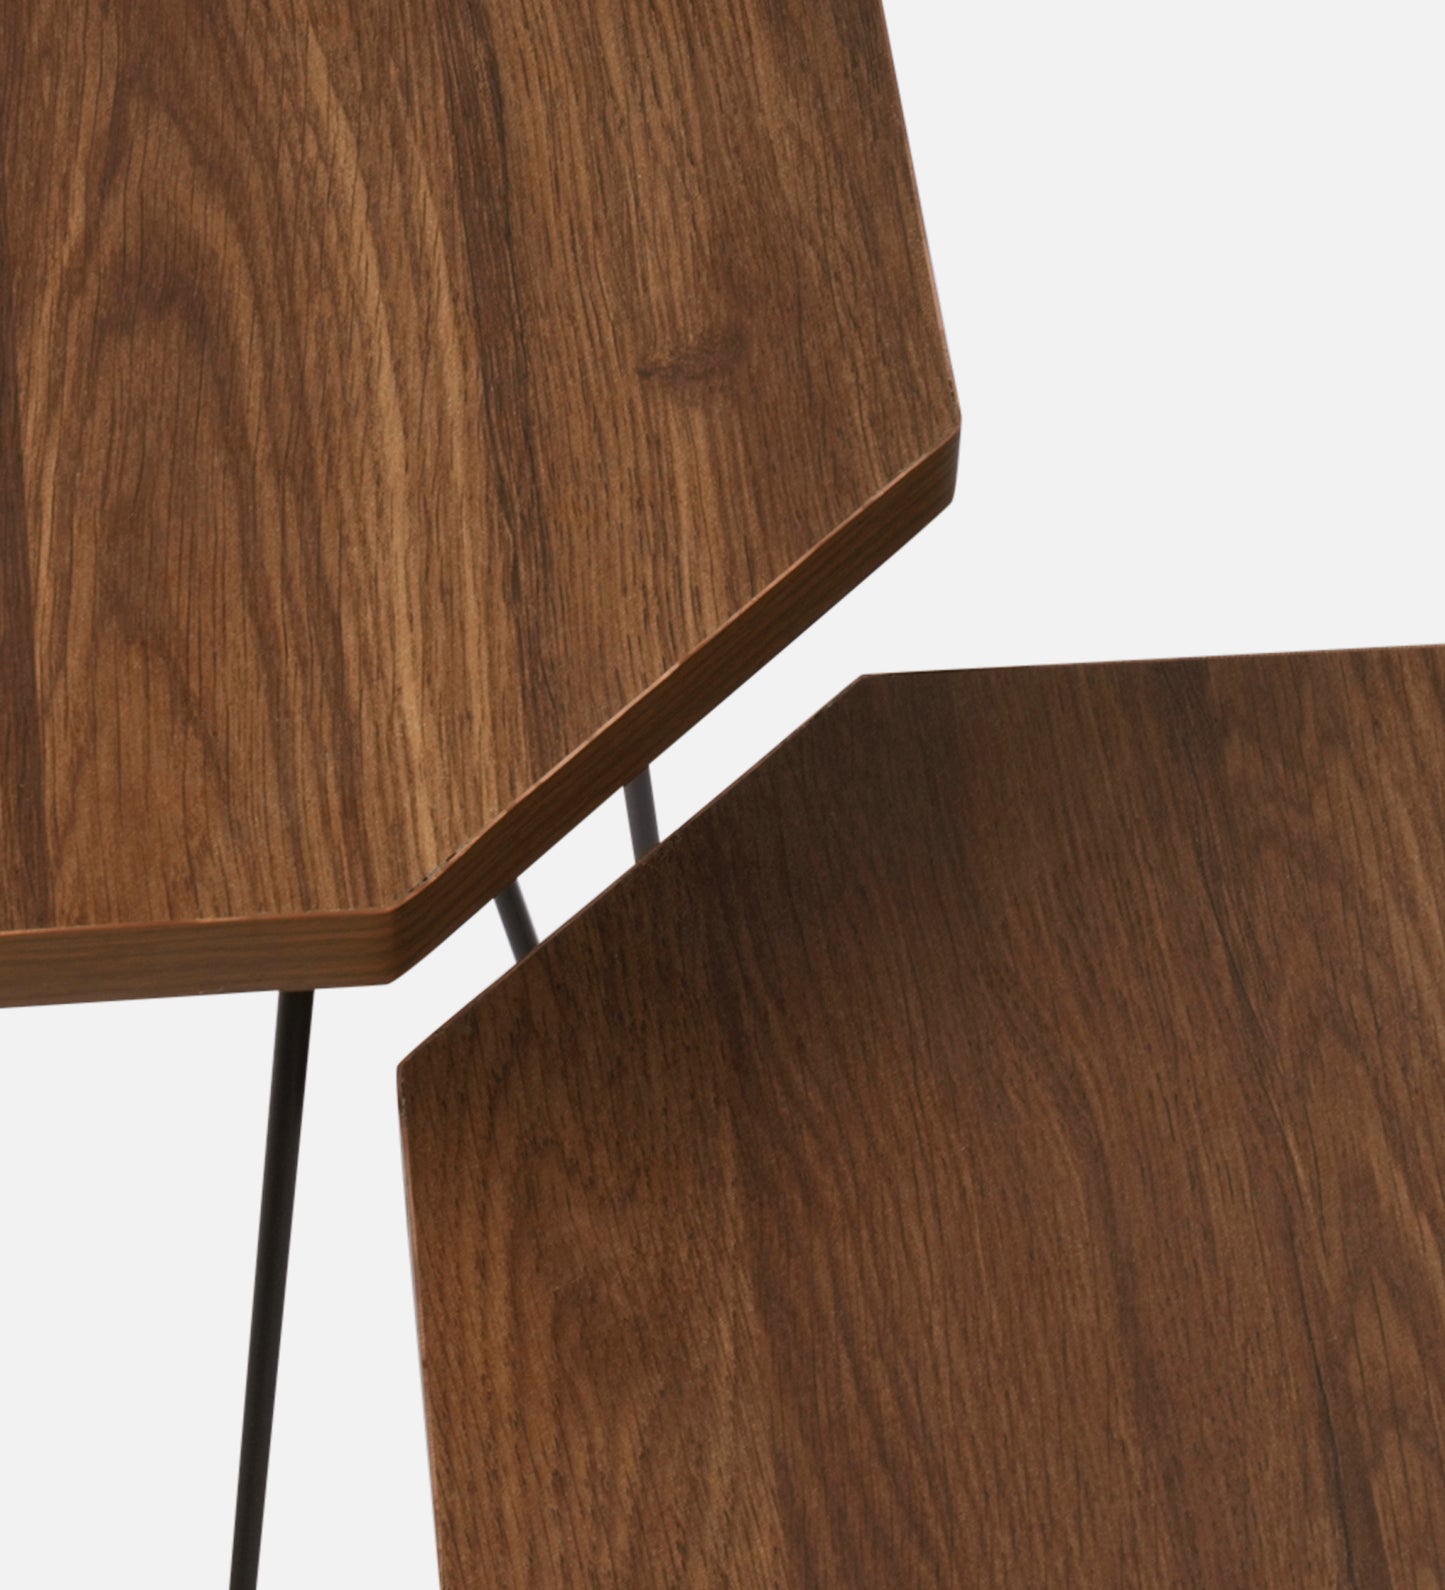 Walnut Hues Octagon Nesting Tables with Hairpin Legs, Side Tables, Wooden Tables, Living Room Decor by A Tiny Mistake